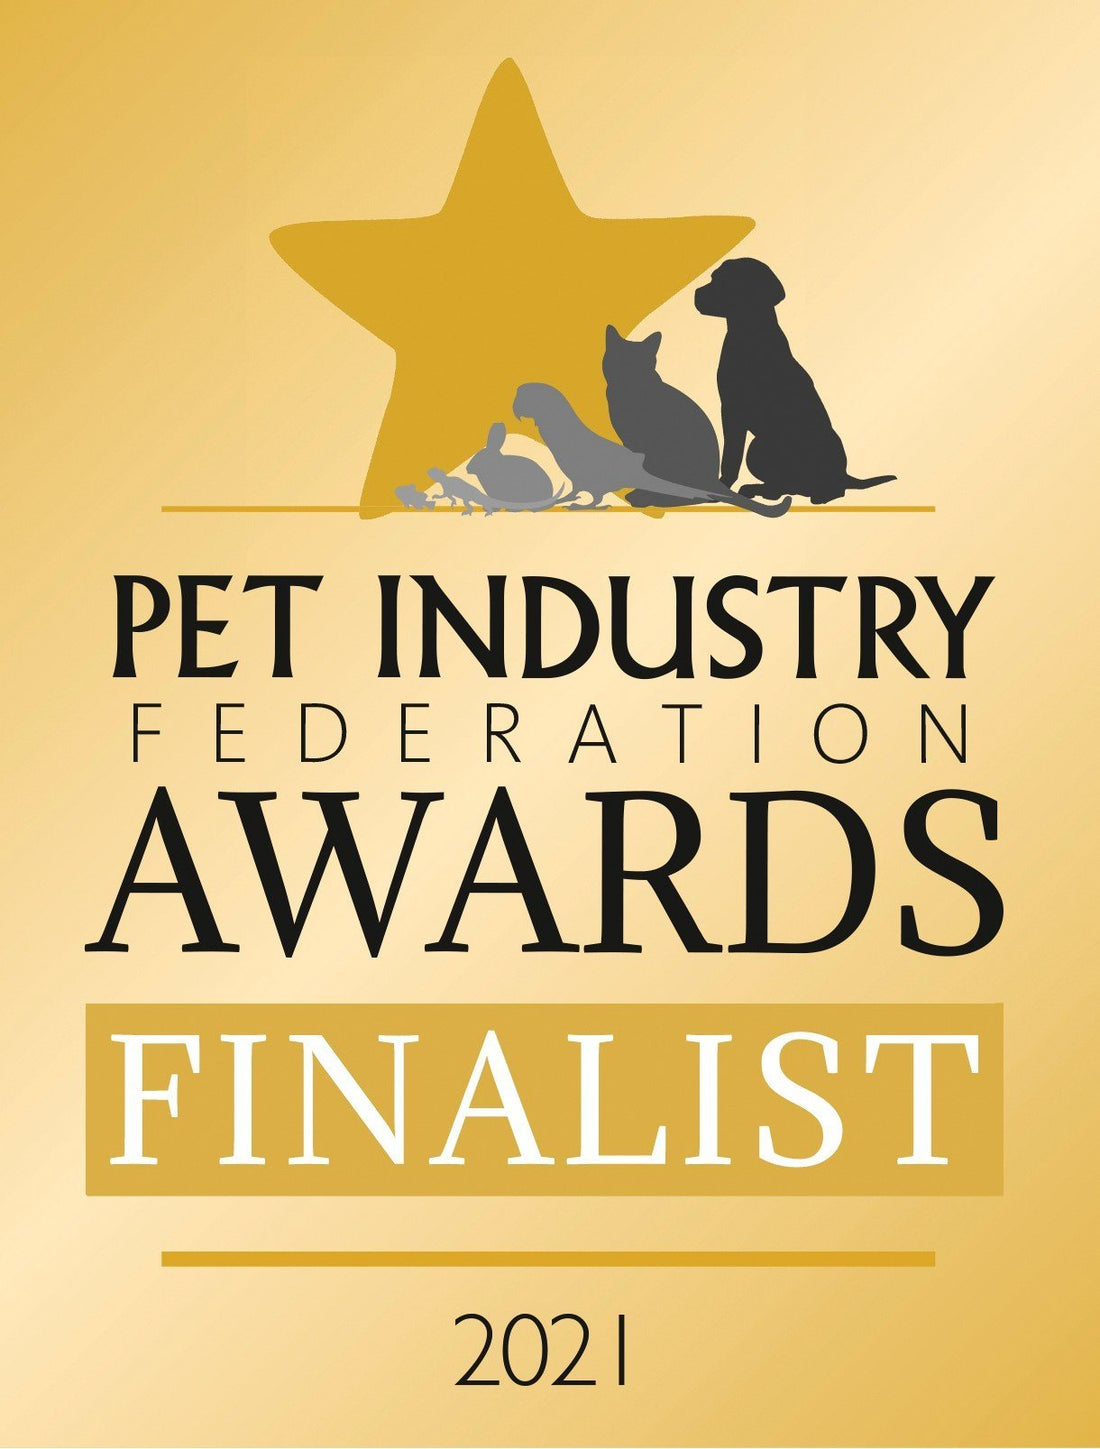 Finalists in the Pet Industry Federation Awards! - Chow Bella Ltd